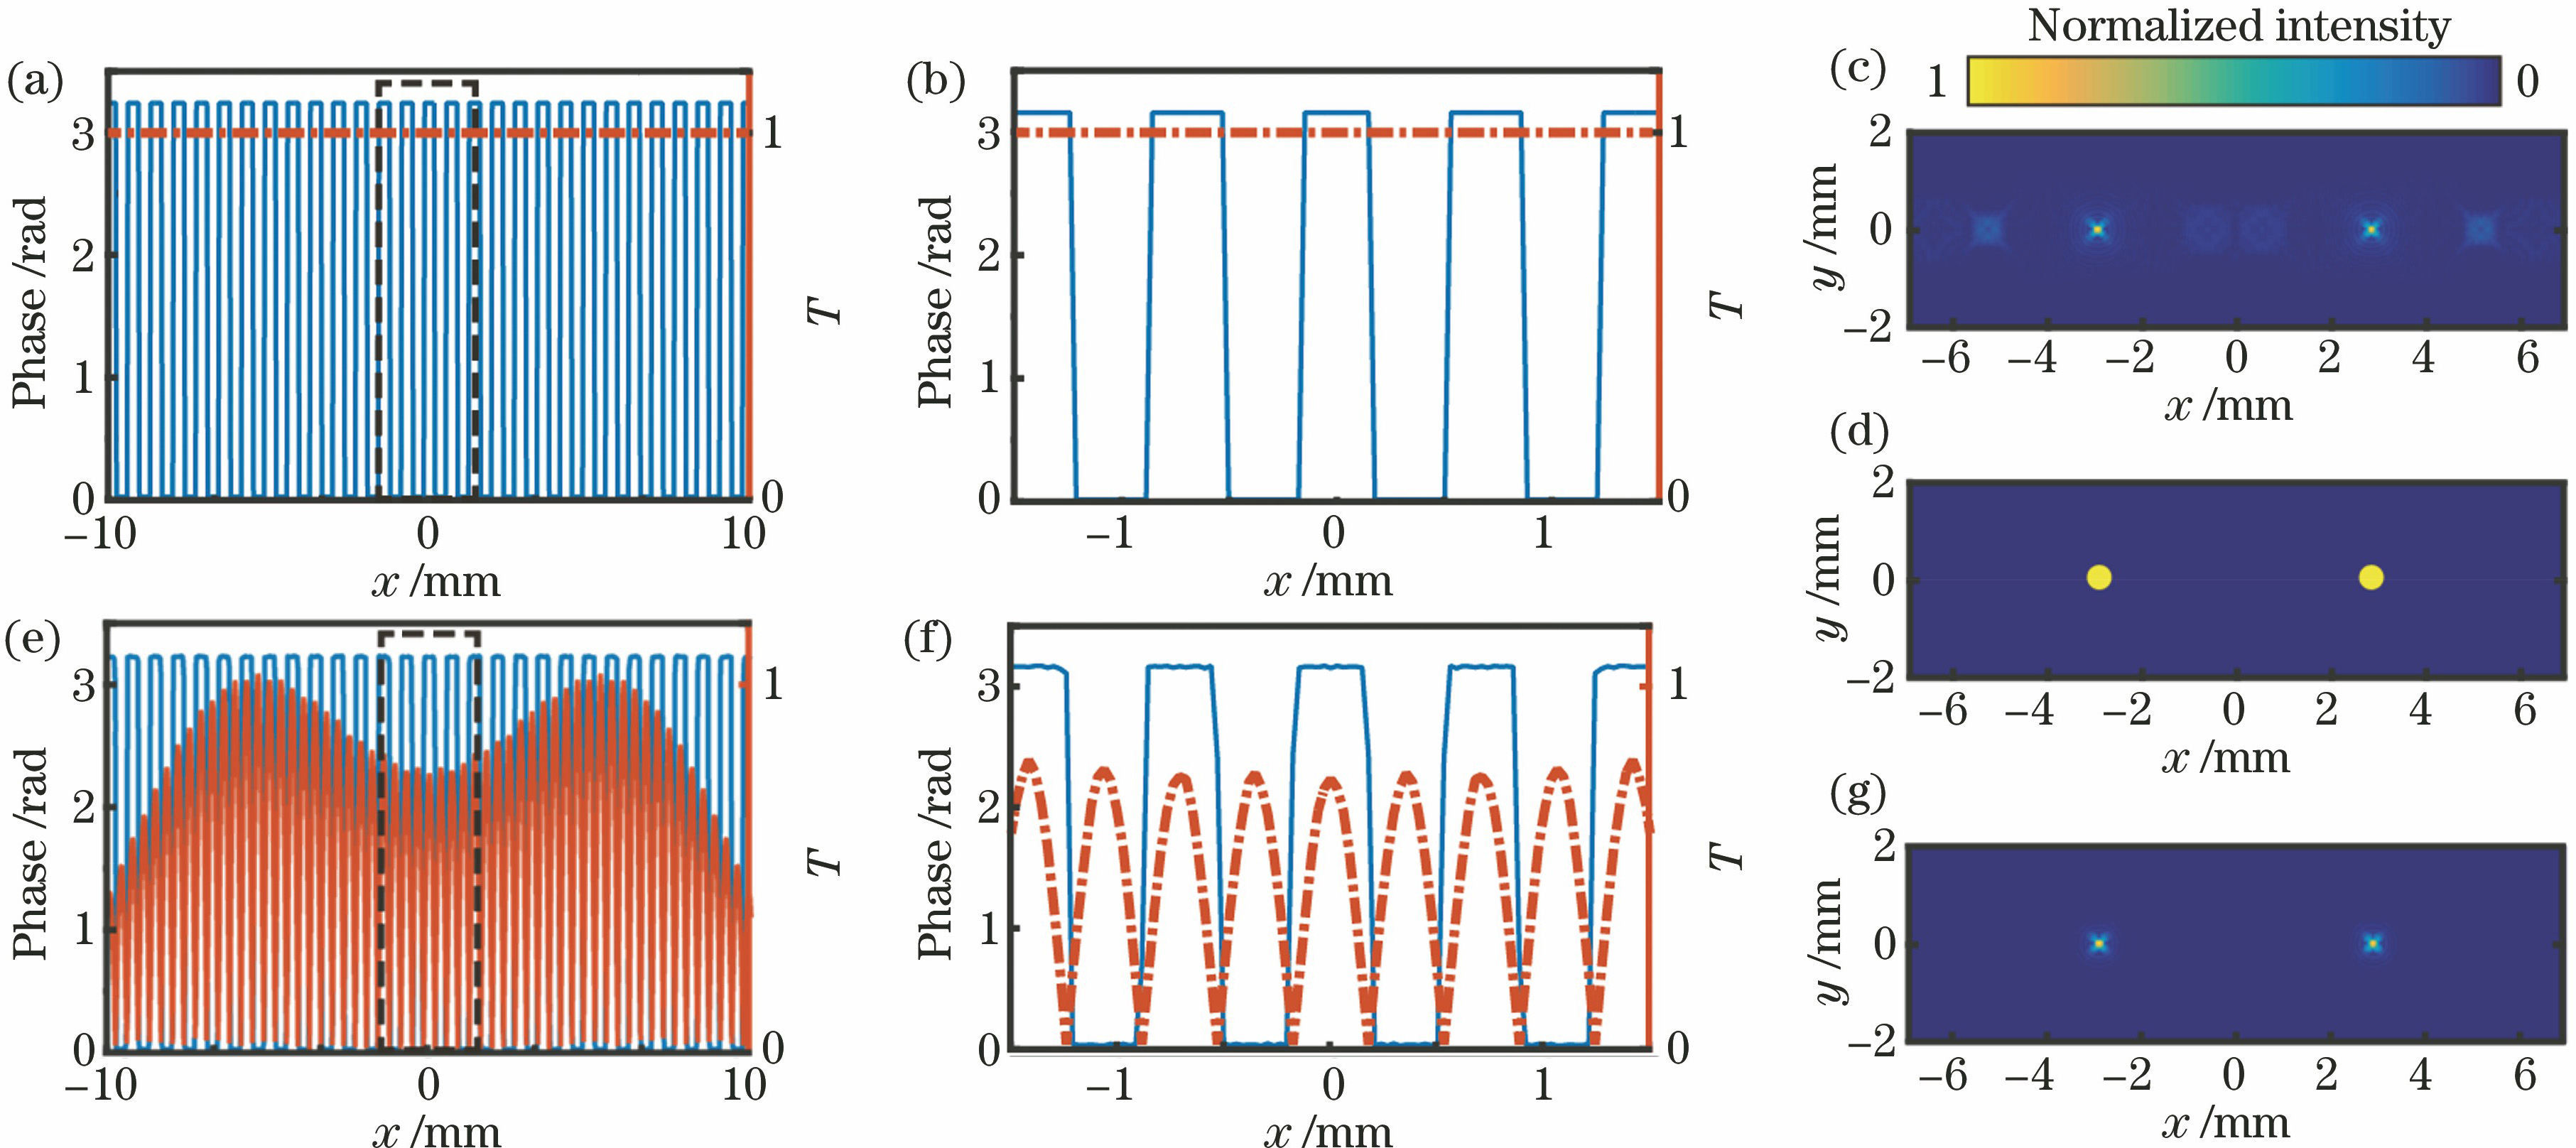 Design of intensity hologram for single-mode BPCGH. (a) Phase delay and transmissivity of single mode binary phase CGH; (b) zoomed display of dotted squared curve in Fig. 2(a); (c) diffracted light intensity of CGH on detection plane; (d) transmissivity map of virtual mask on detection plane (transmissivity is 1 at circle areas and 0 at other area); (e) phase delay and transmissivity curves of H'; (f) zoomed display of dotted squared curves in Fig. 2(e); (g) diffracted light intensity of BPCGH with complex transmissivity of H″